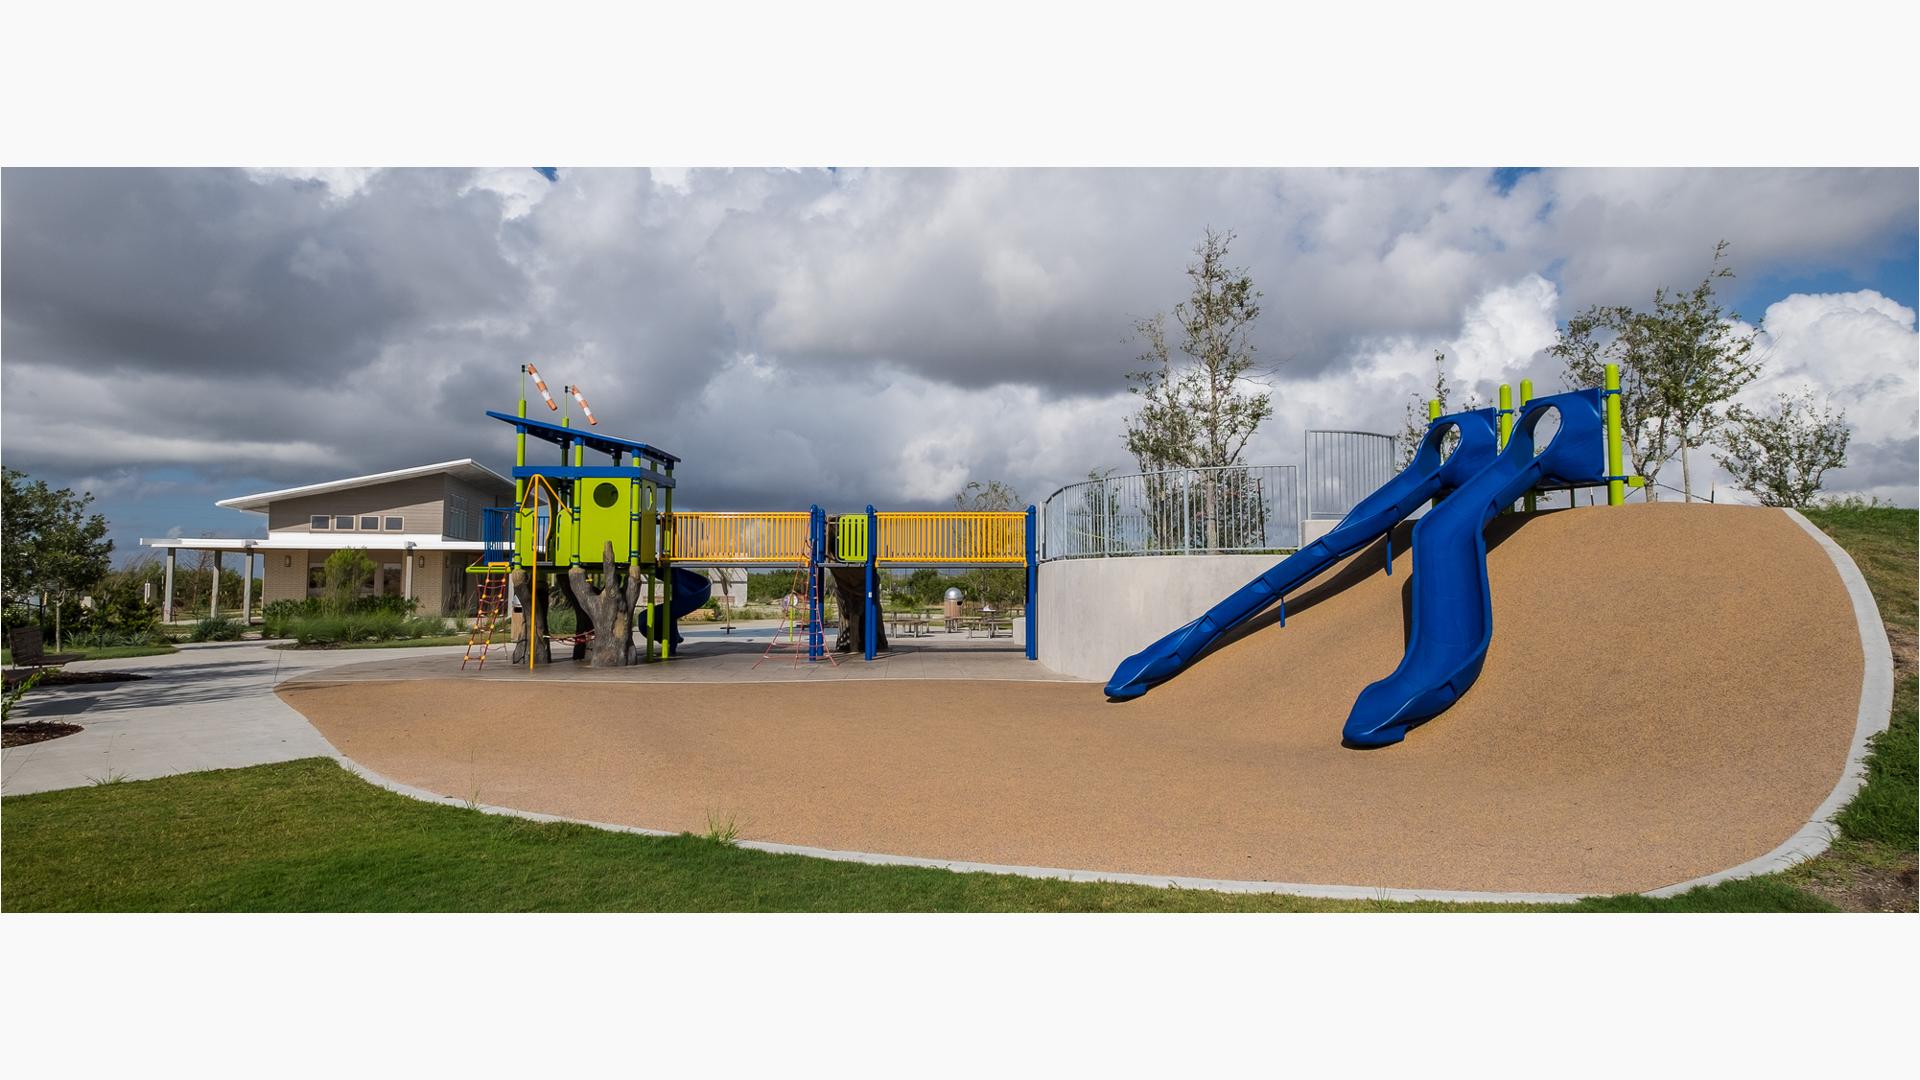 Oso Bay Wetlands Preserve and Learning Center, Corpus Christi, TX. The PlayBooster® playground structure is full of opportunities to climb, twirl and slide in a wetlands-theme environment.